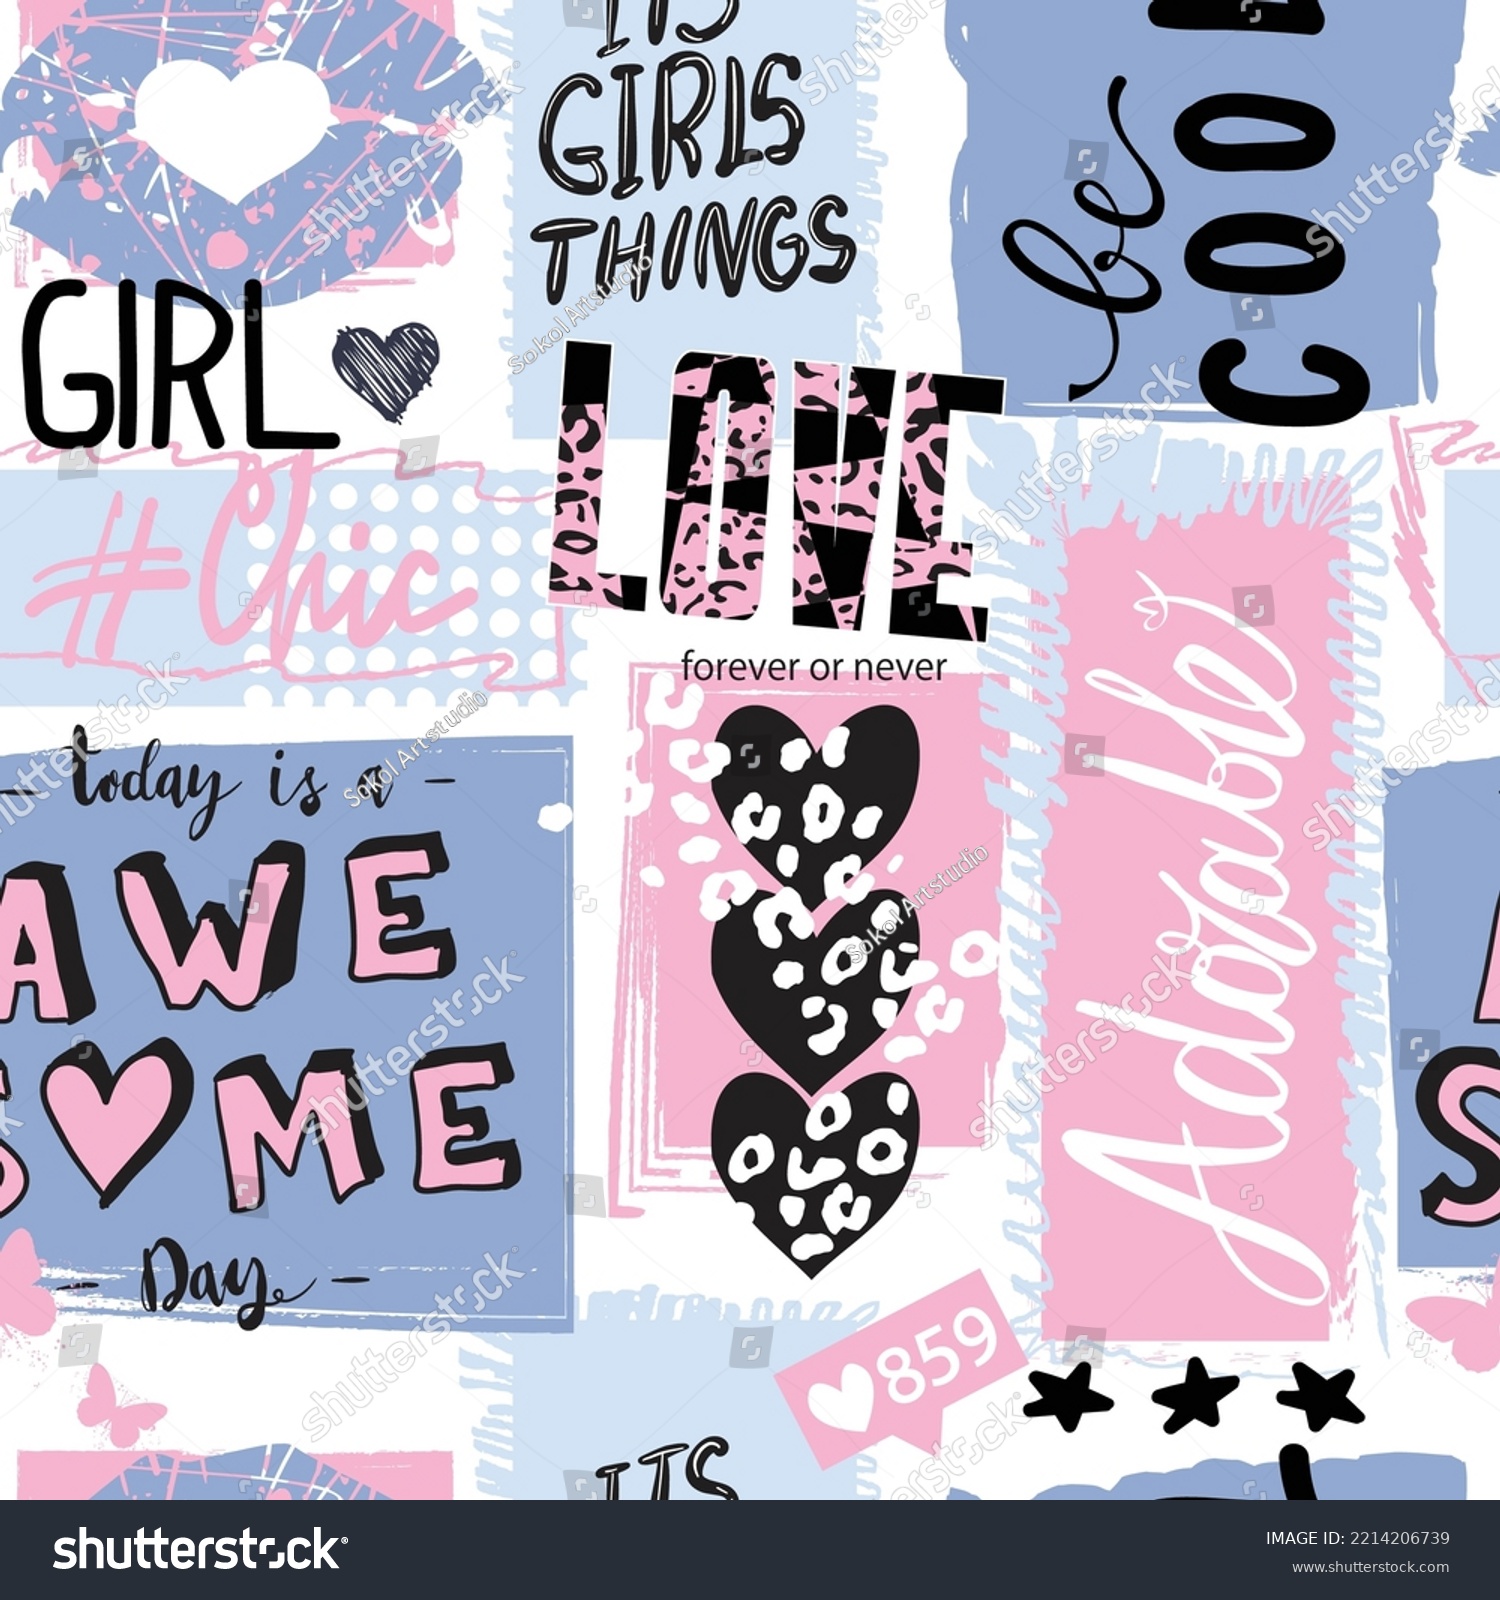 Girls seamless pattern with calligraphic slogan, hearts, words  . background for texylie, graphic tees, kids wear. Wallpaper for teenager girls. Fashion style #2214206739